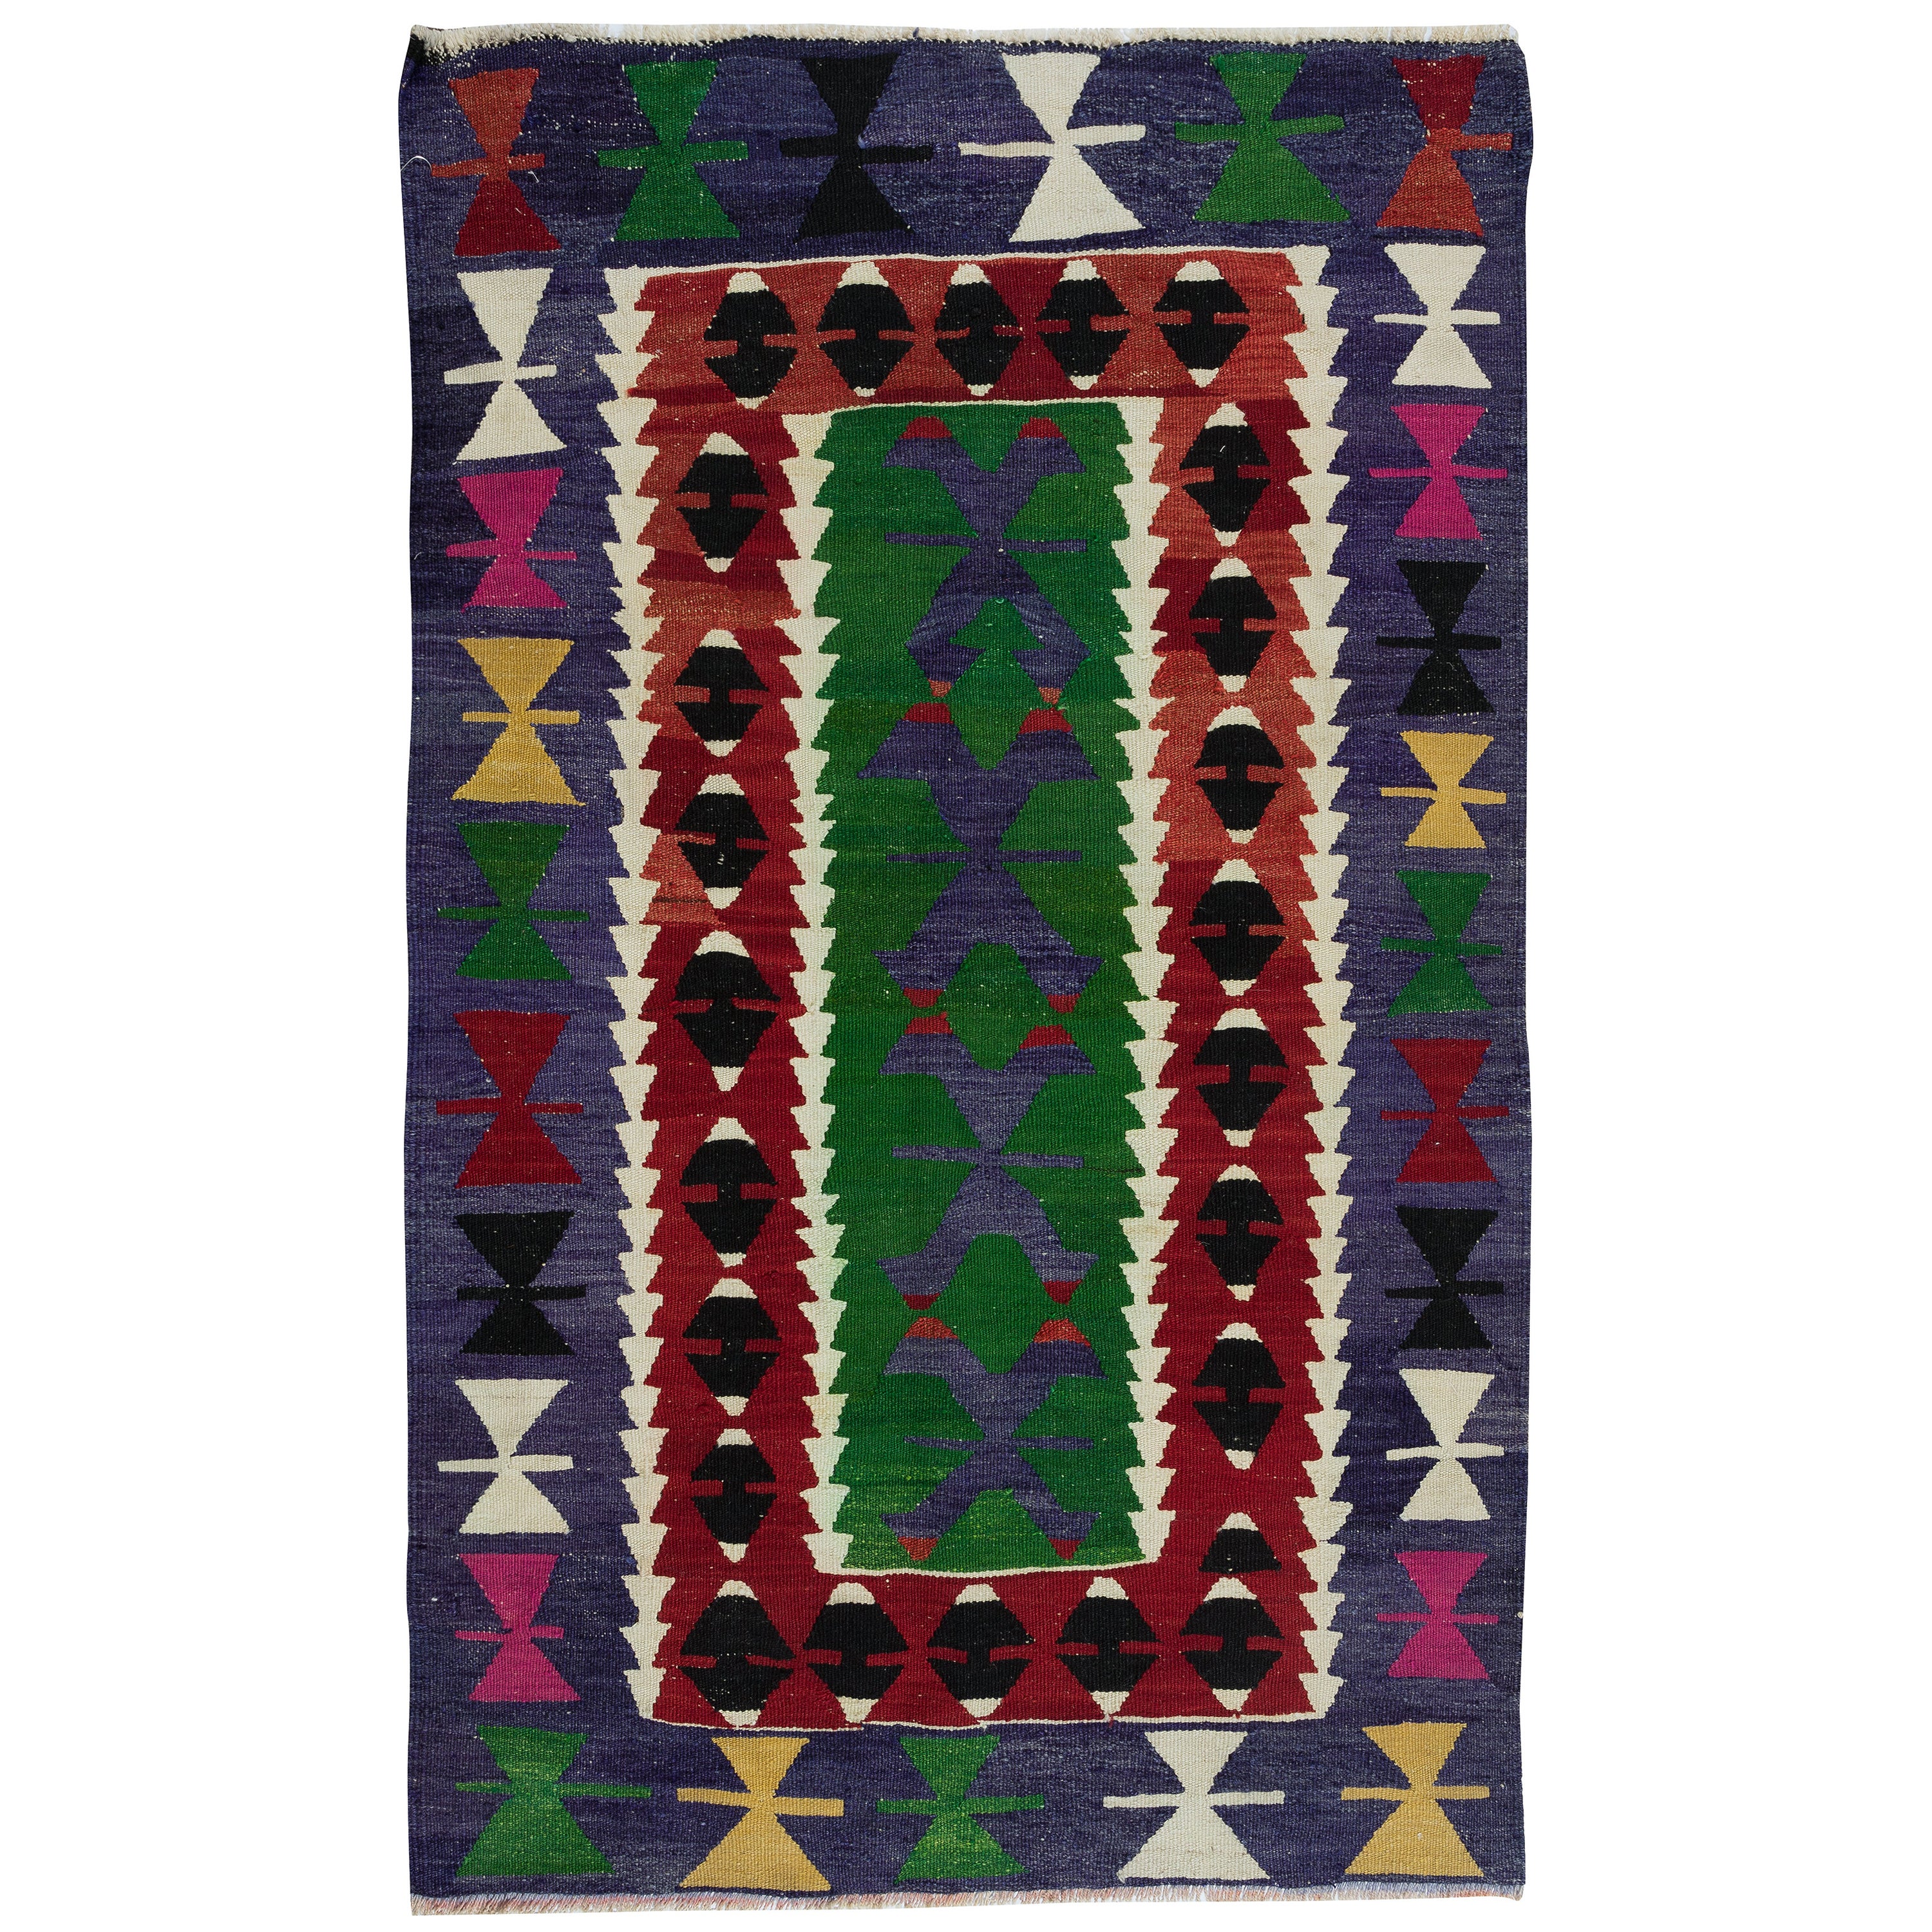 3x4.8 Ft Vintage Geometric Turkish Wool Kilim 'Flat-Weave', Colorful Accent Rug For Sale